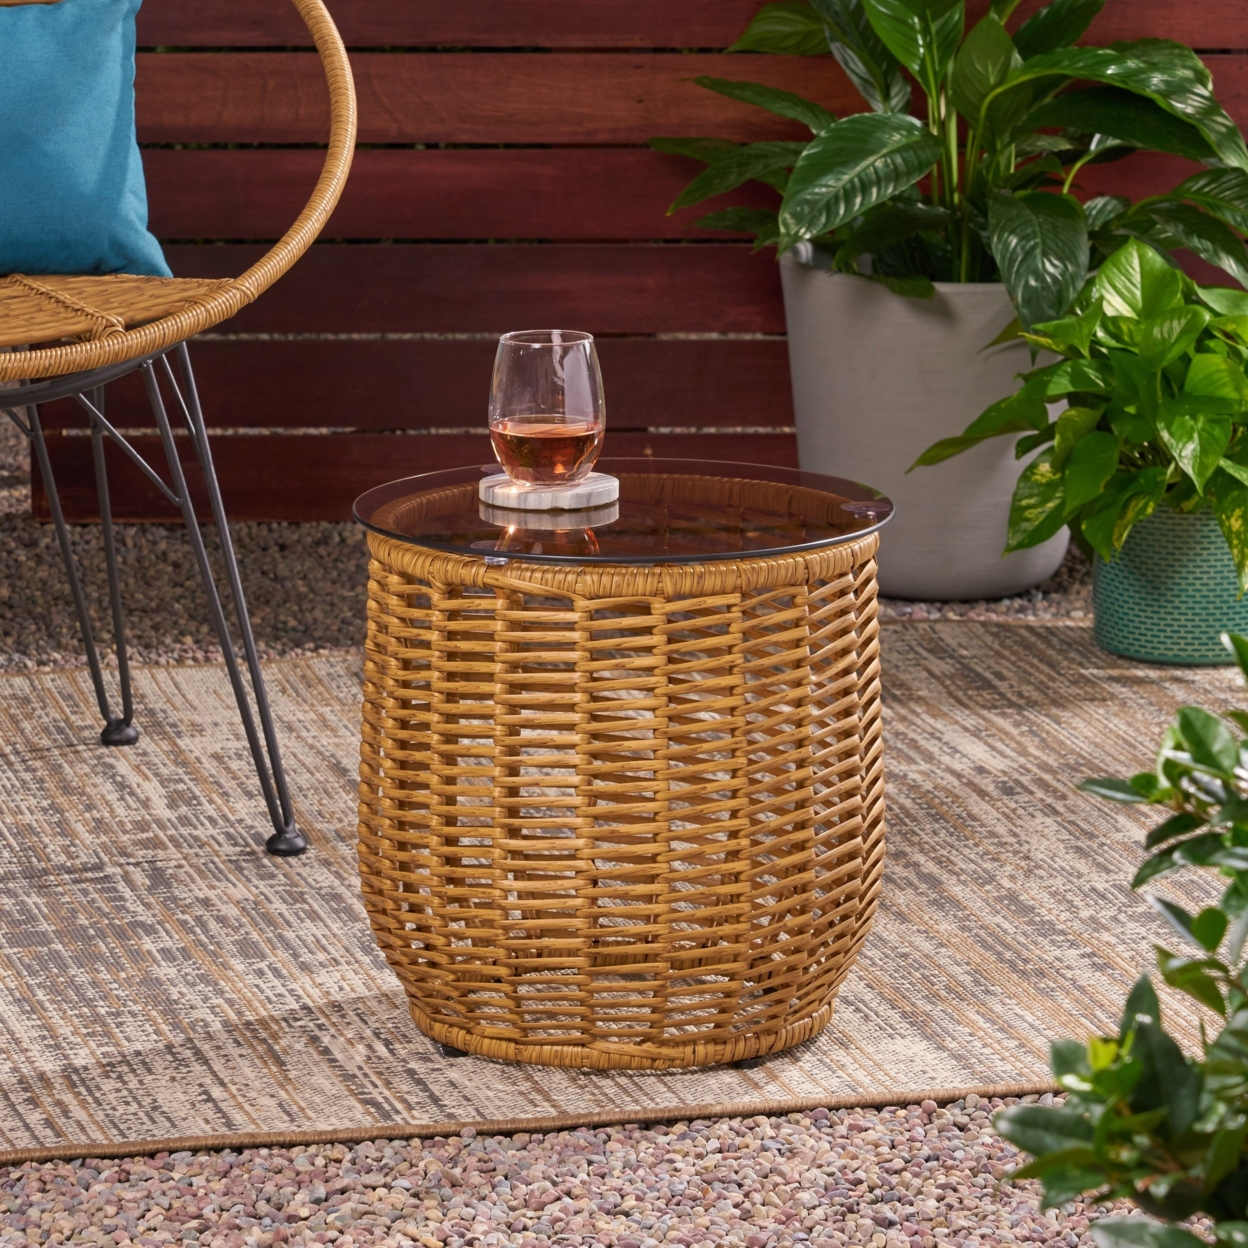 Ola Wicker Side Table With Tempered Glass Top - Black Wicker